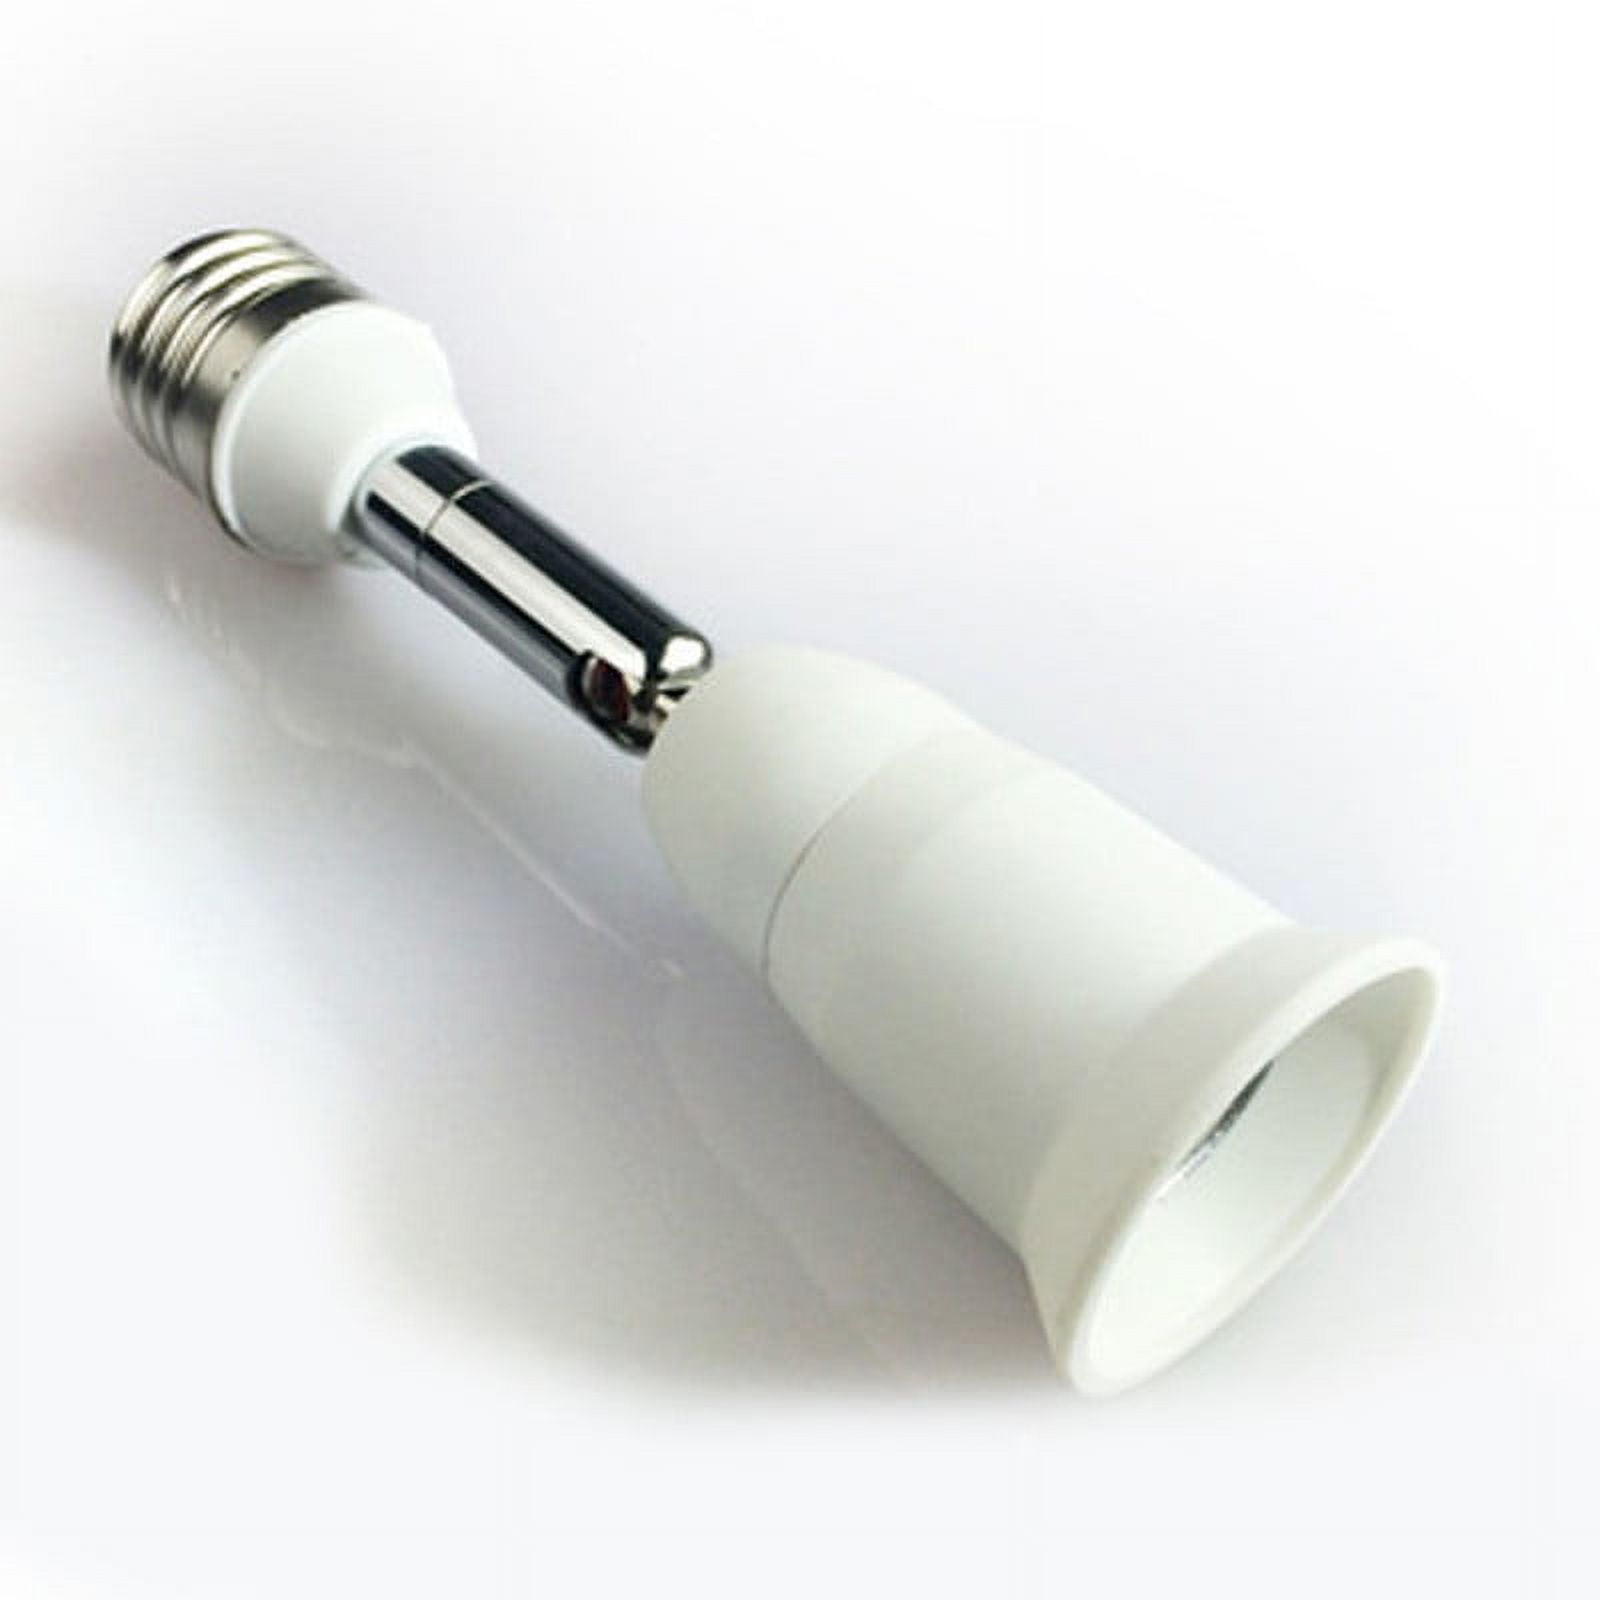 Adjustable White E27 Base Light Socket Splitter With Extension Hose 3/4/5  Way Adapter For Led Deformable Lamp From Ledsupplies, $5.78